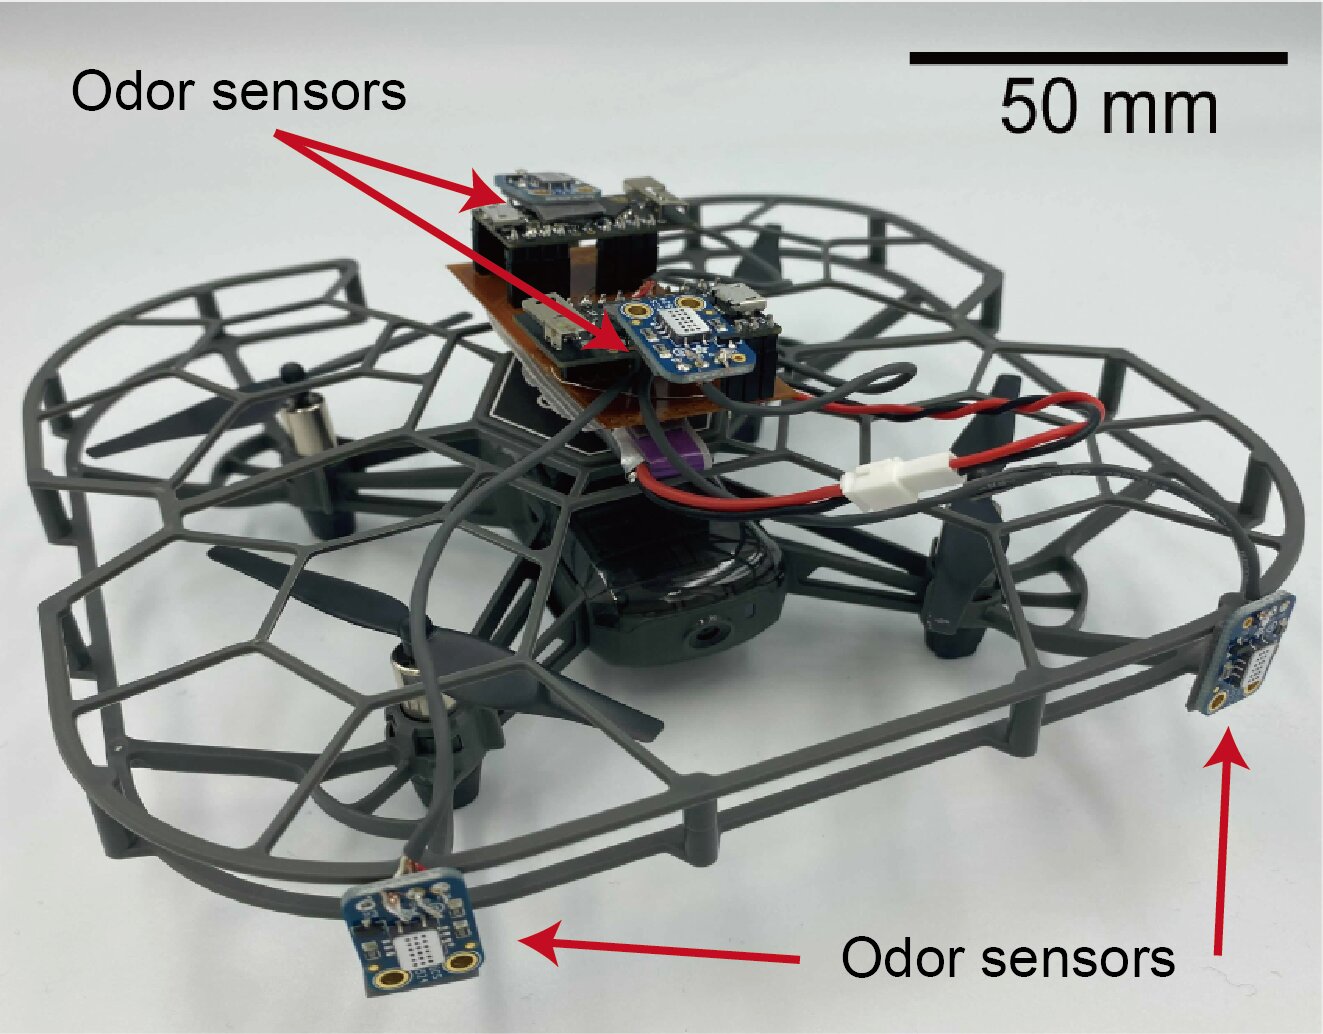 A palm-sized drone to track chemical plumes